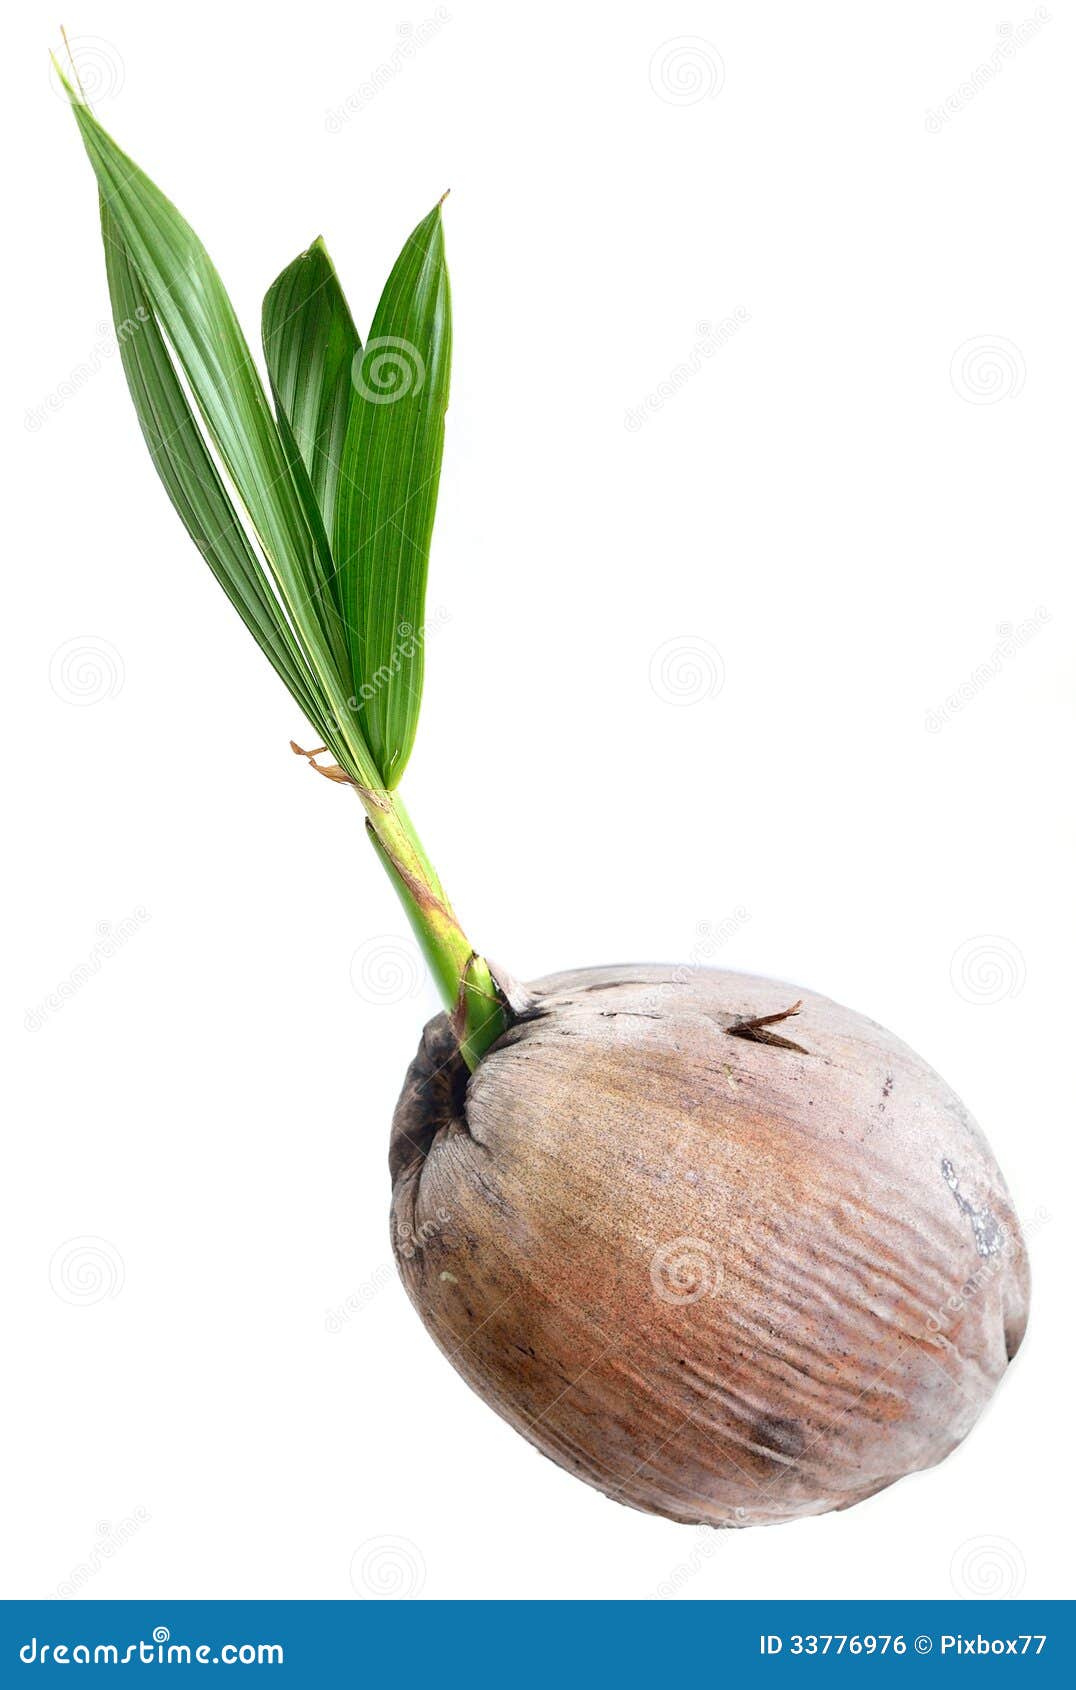 Young plant of coconut tree grownup isolated on white background.